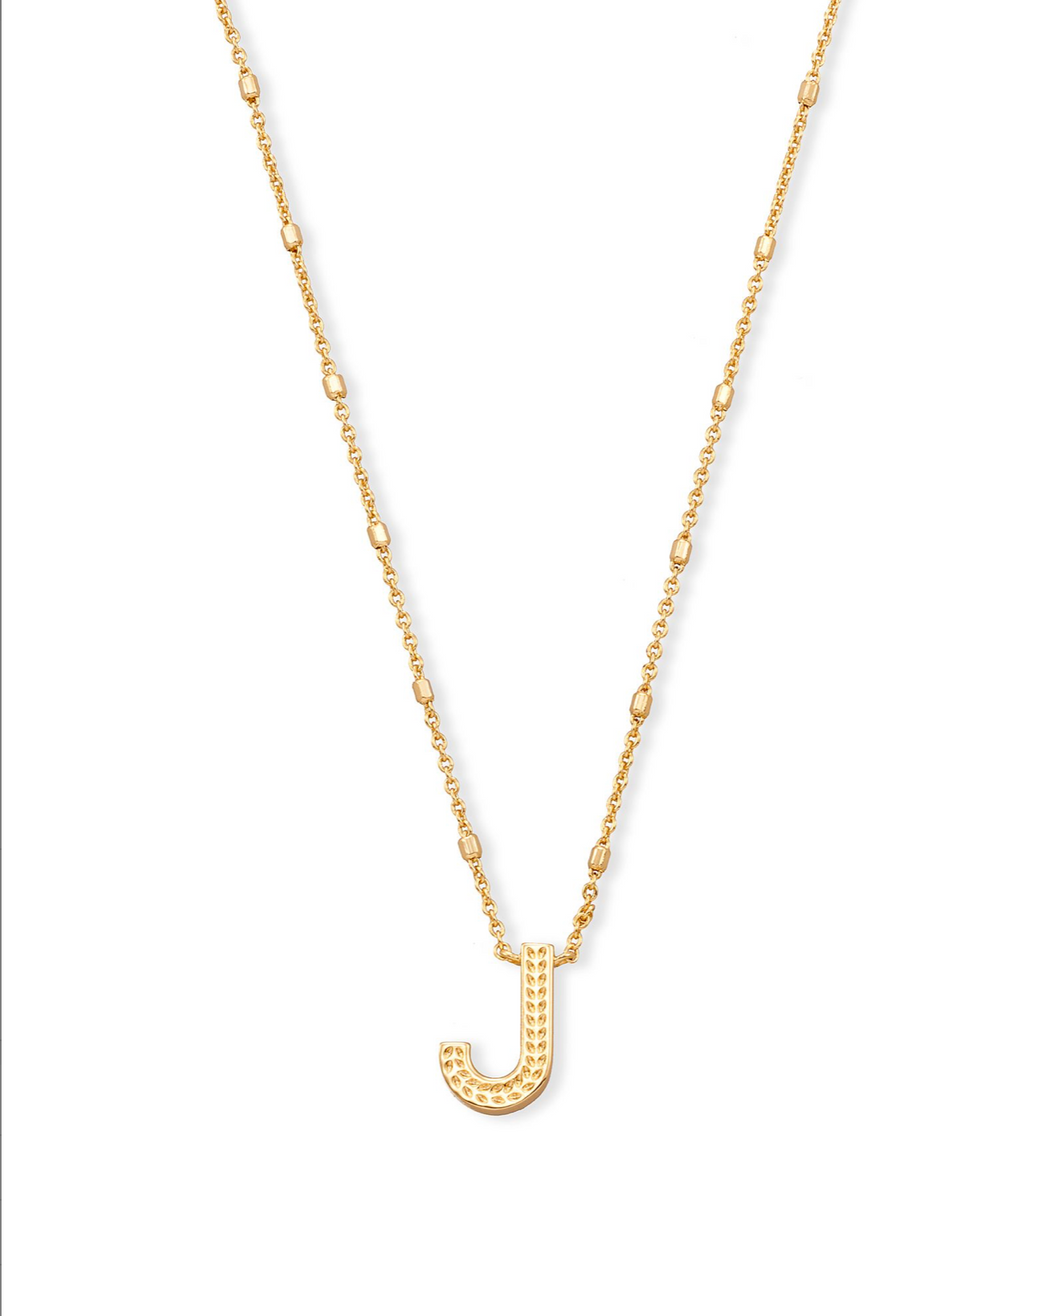 Letter J Pendant Necklace in Gold by Kendra Scott